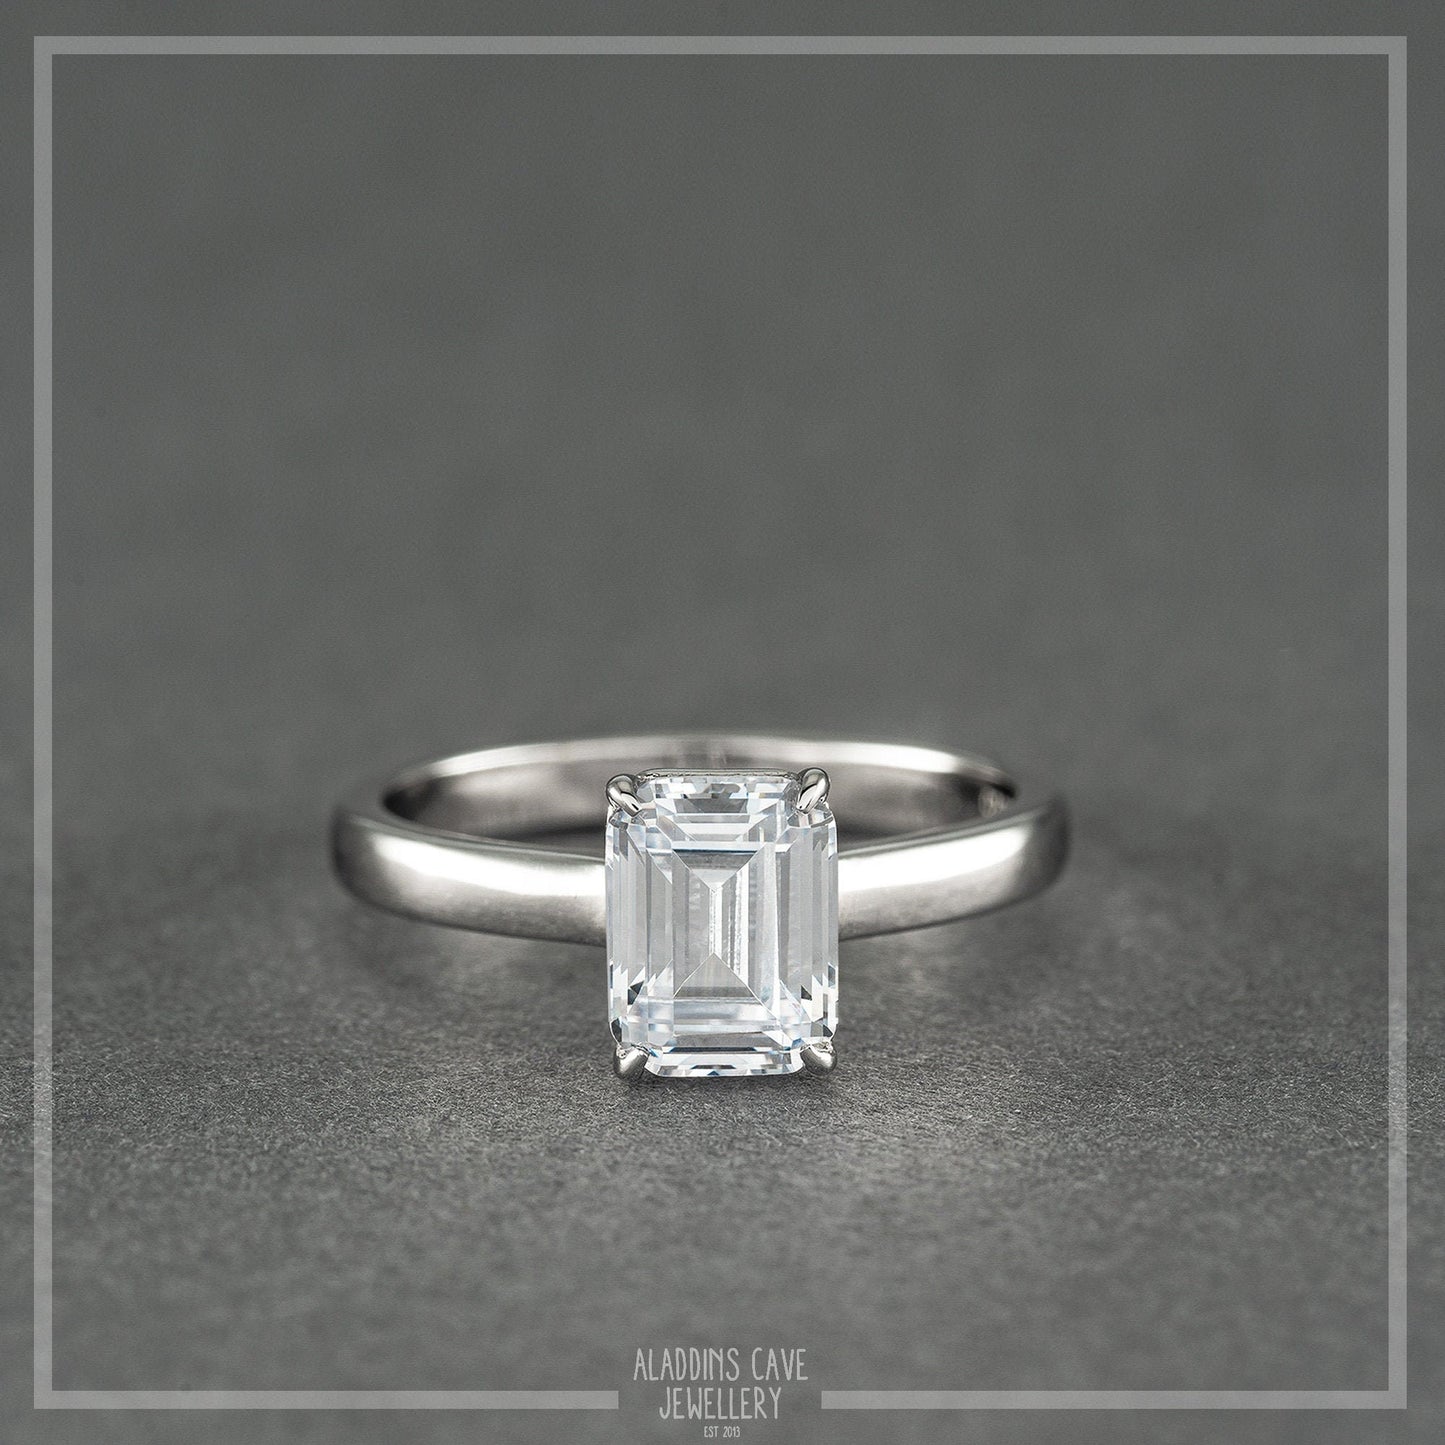 Wedding Set 1.9ct Emerald cut solitaire and 2x half eternity simulated diamond ring available in Sterling Silver or White Gold Filled